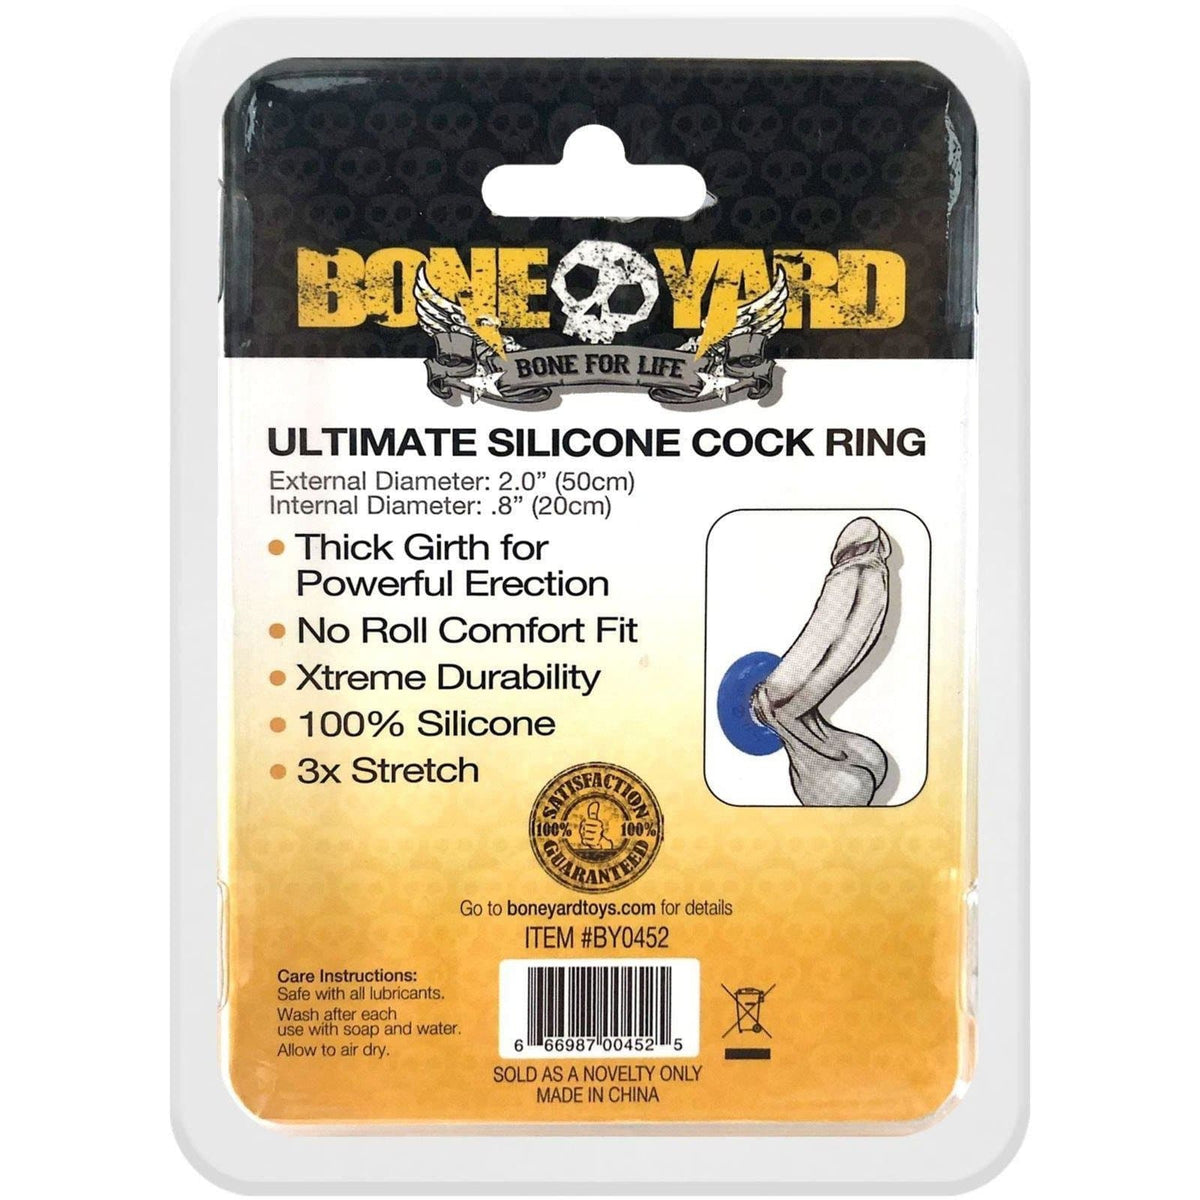 ultimate silicone cock ring blue